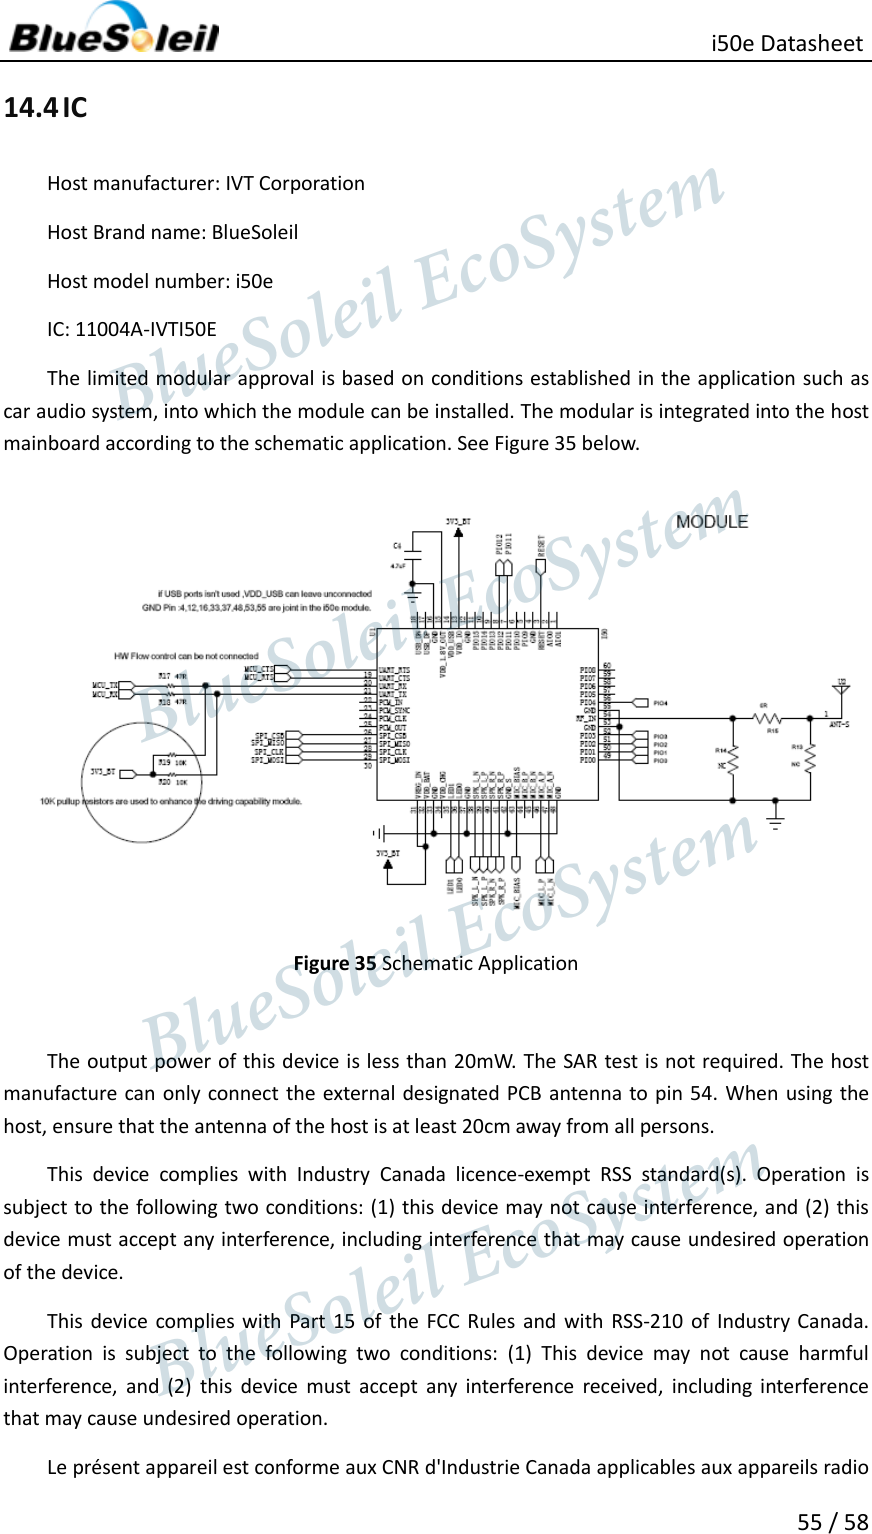                                                   i50e Datasheet 55 / 58 14.4 IC Host manufacturer: IVT Corporation Host Brand name: BlueSoleil Host model number: i50e IC: 11004A-IVTI50E The limited modular approval is based on conditions established in the application such as car audio system, into which the module can be installed. The modular is integrated into the host mainboard according to the schematic application. See Figure 35 below.  Figure 35 Schematic Application    The output power of this device is less than 20mW. The SAR test is not required. The host manufacture can only connect the external designated PCB  antenna to pin 54.  When using the host, ensure that the antenna of the host is at least 20cm away from all persons. This  device  complies  with  Industry  Canada  licence-exempt  RSS  standard(s).  Operation  is subject to the following two conditions: (1) this device may not cause interference, and (2) this device must accept any interference, including interference that may cause undesired operation of the device. This  device  complies with Part  15  of  the  FCC Rules and  with  RSS-210  of  Industry Canada. Operation  is  subject  to  the  following  two  conditions:  (1)  This  device  may  not  cause  harmful interference,  and  (2)  this  device  must  accept  any  interference  received,  including  interference that may cause undesired operation.     Le présent appareil est conforme aux CNR d&apos;Industrie Canada applicables aux appareils radio                  BlueSoleil EcoSystem            BlueSoleil EcoSystem      BlueSoleil EcoSystemBlueSoleil EcoSystem